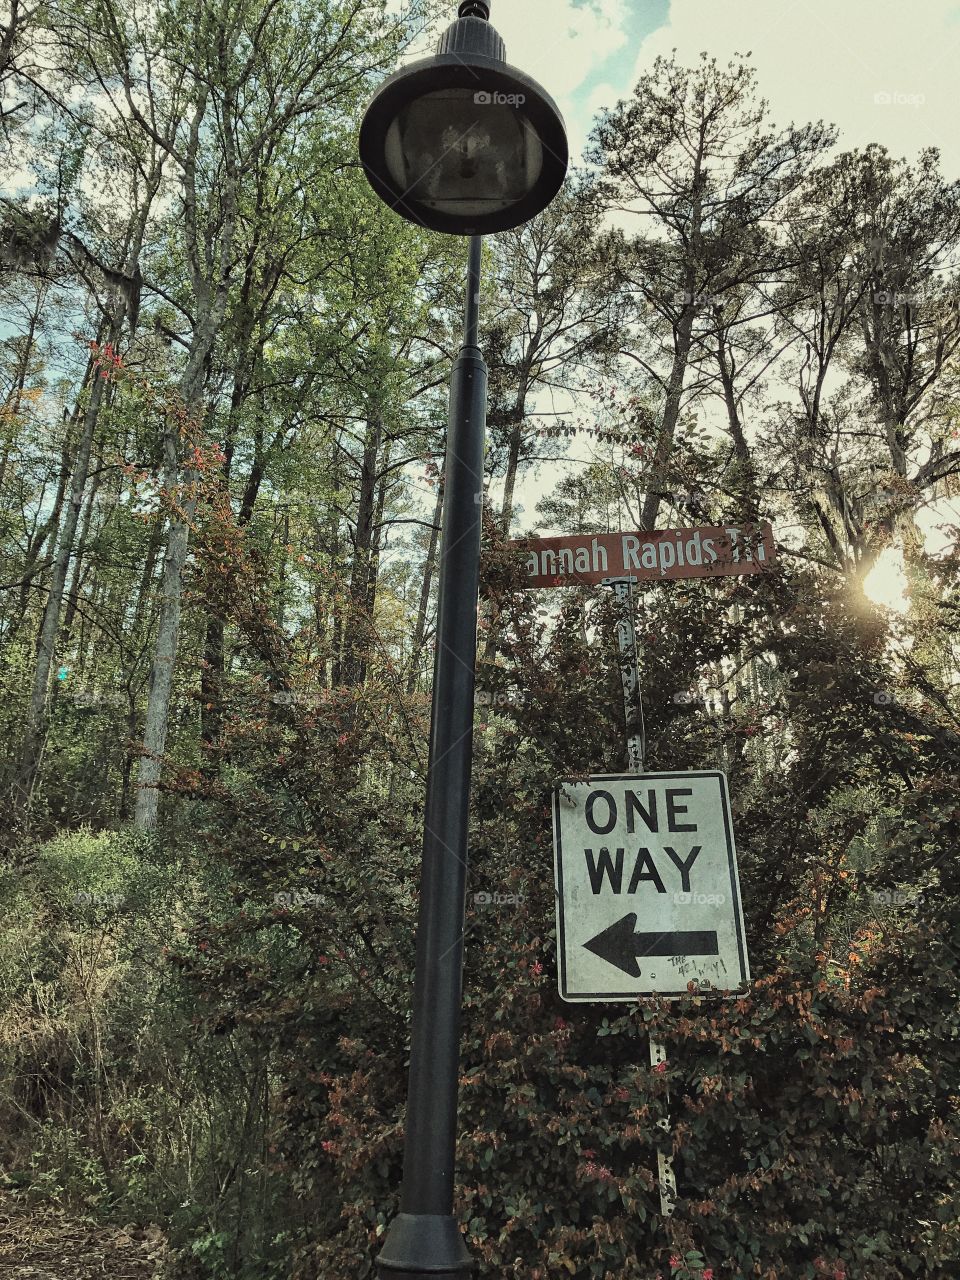 Only one way